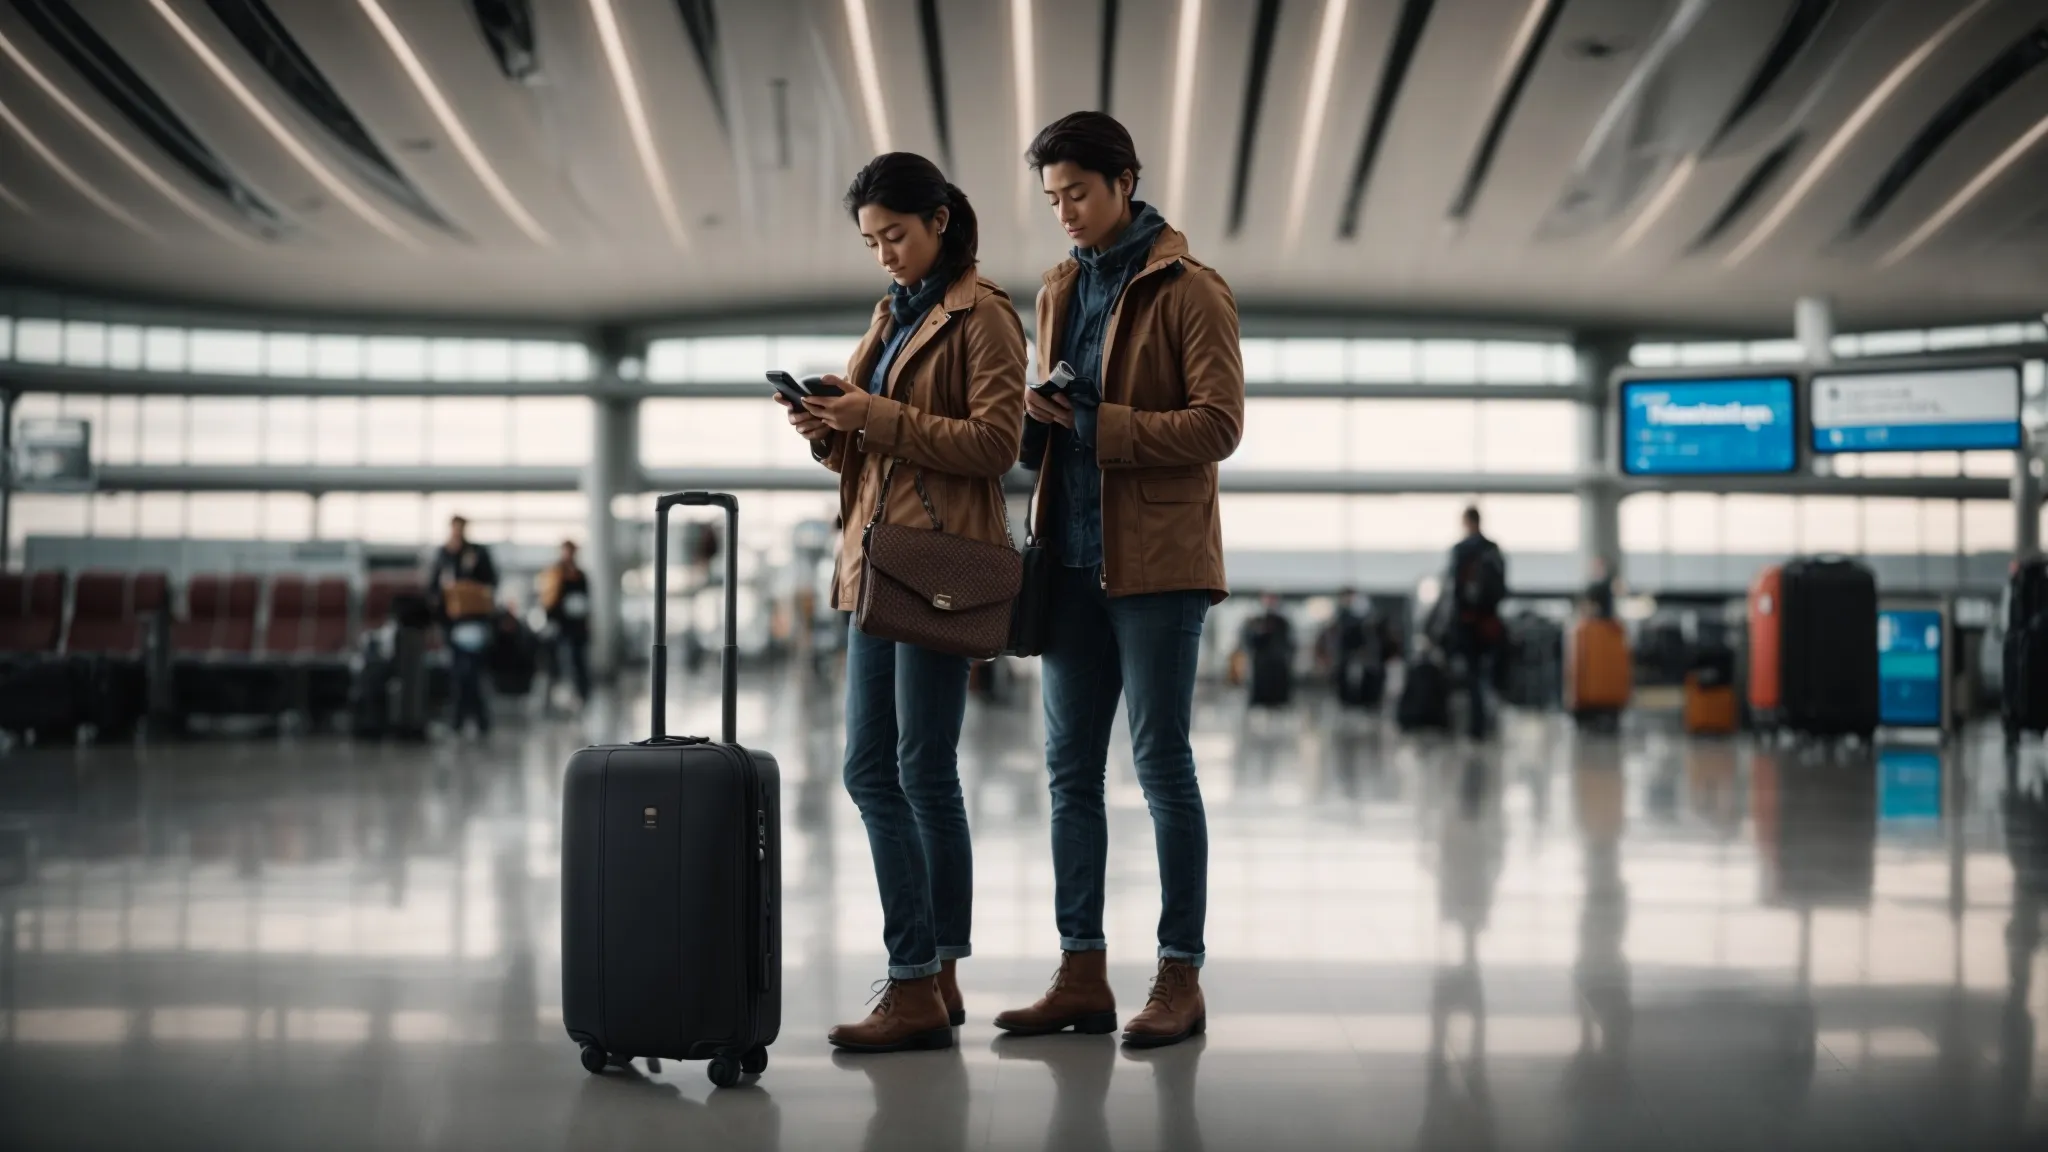 a traveler is standing in an airport terminal, surrounded by their smart luggage, wearing noise-cancelling headphones, and checking a travel app on their smartphone.